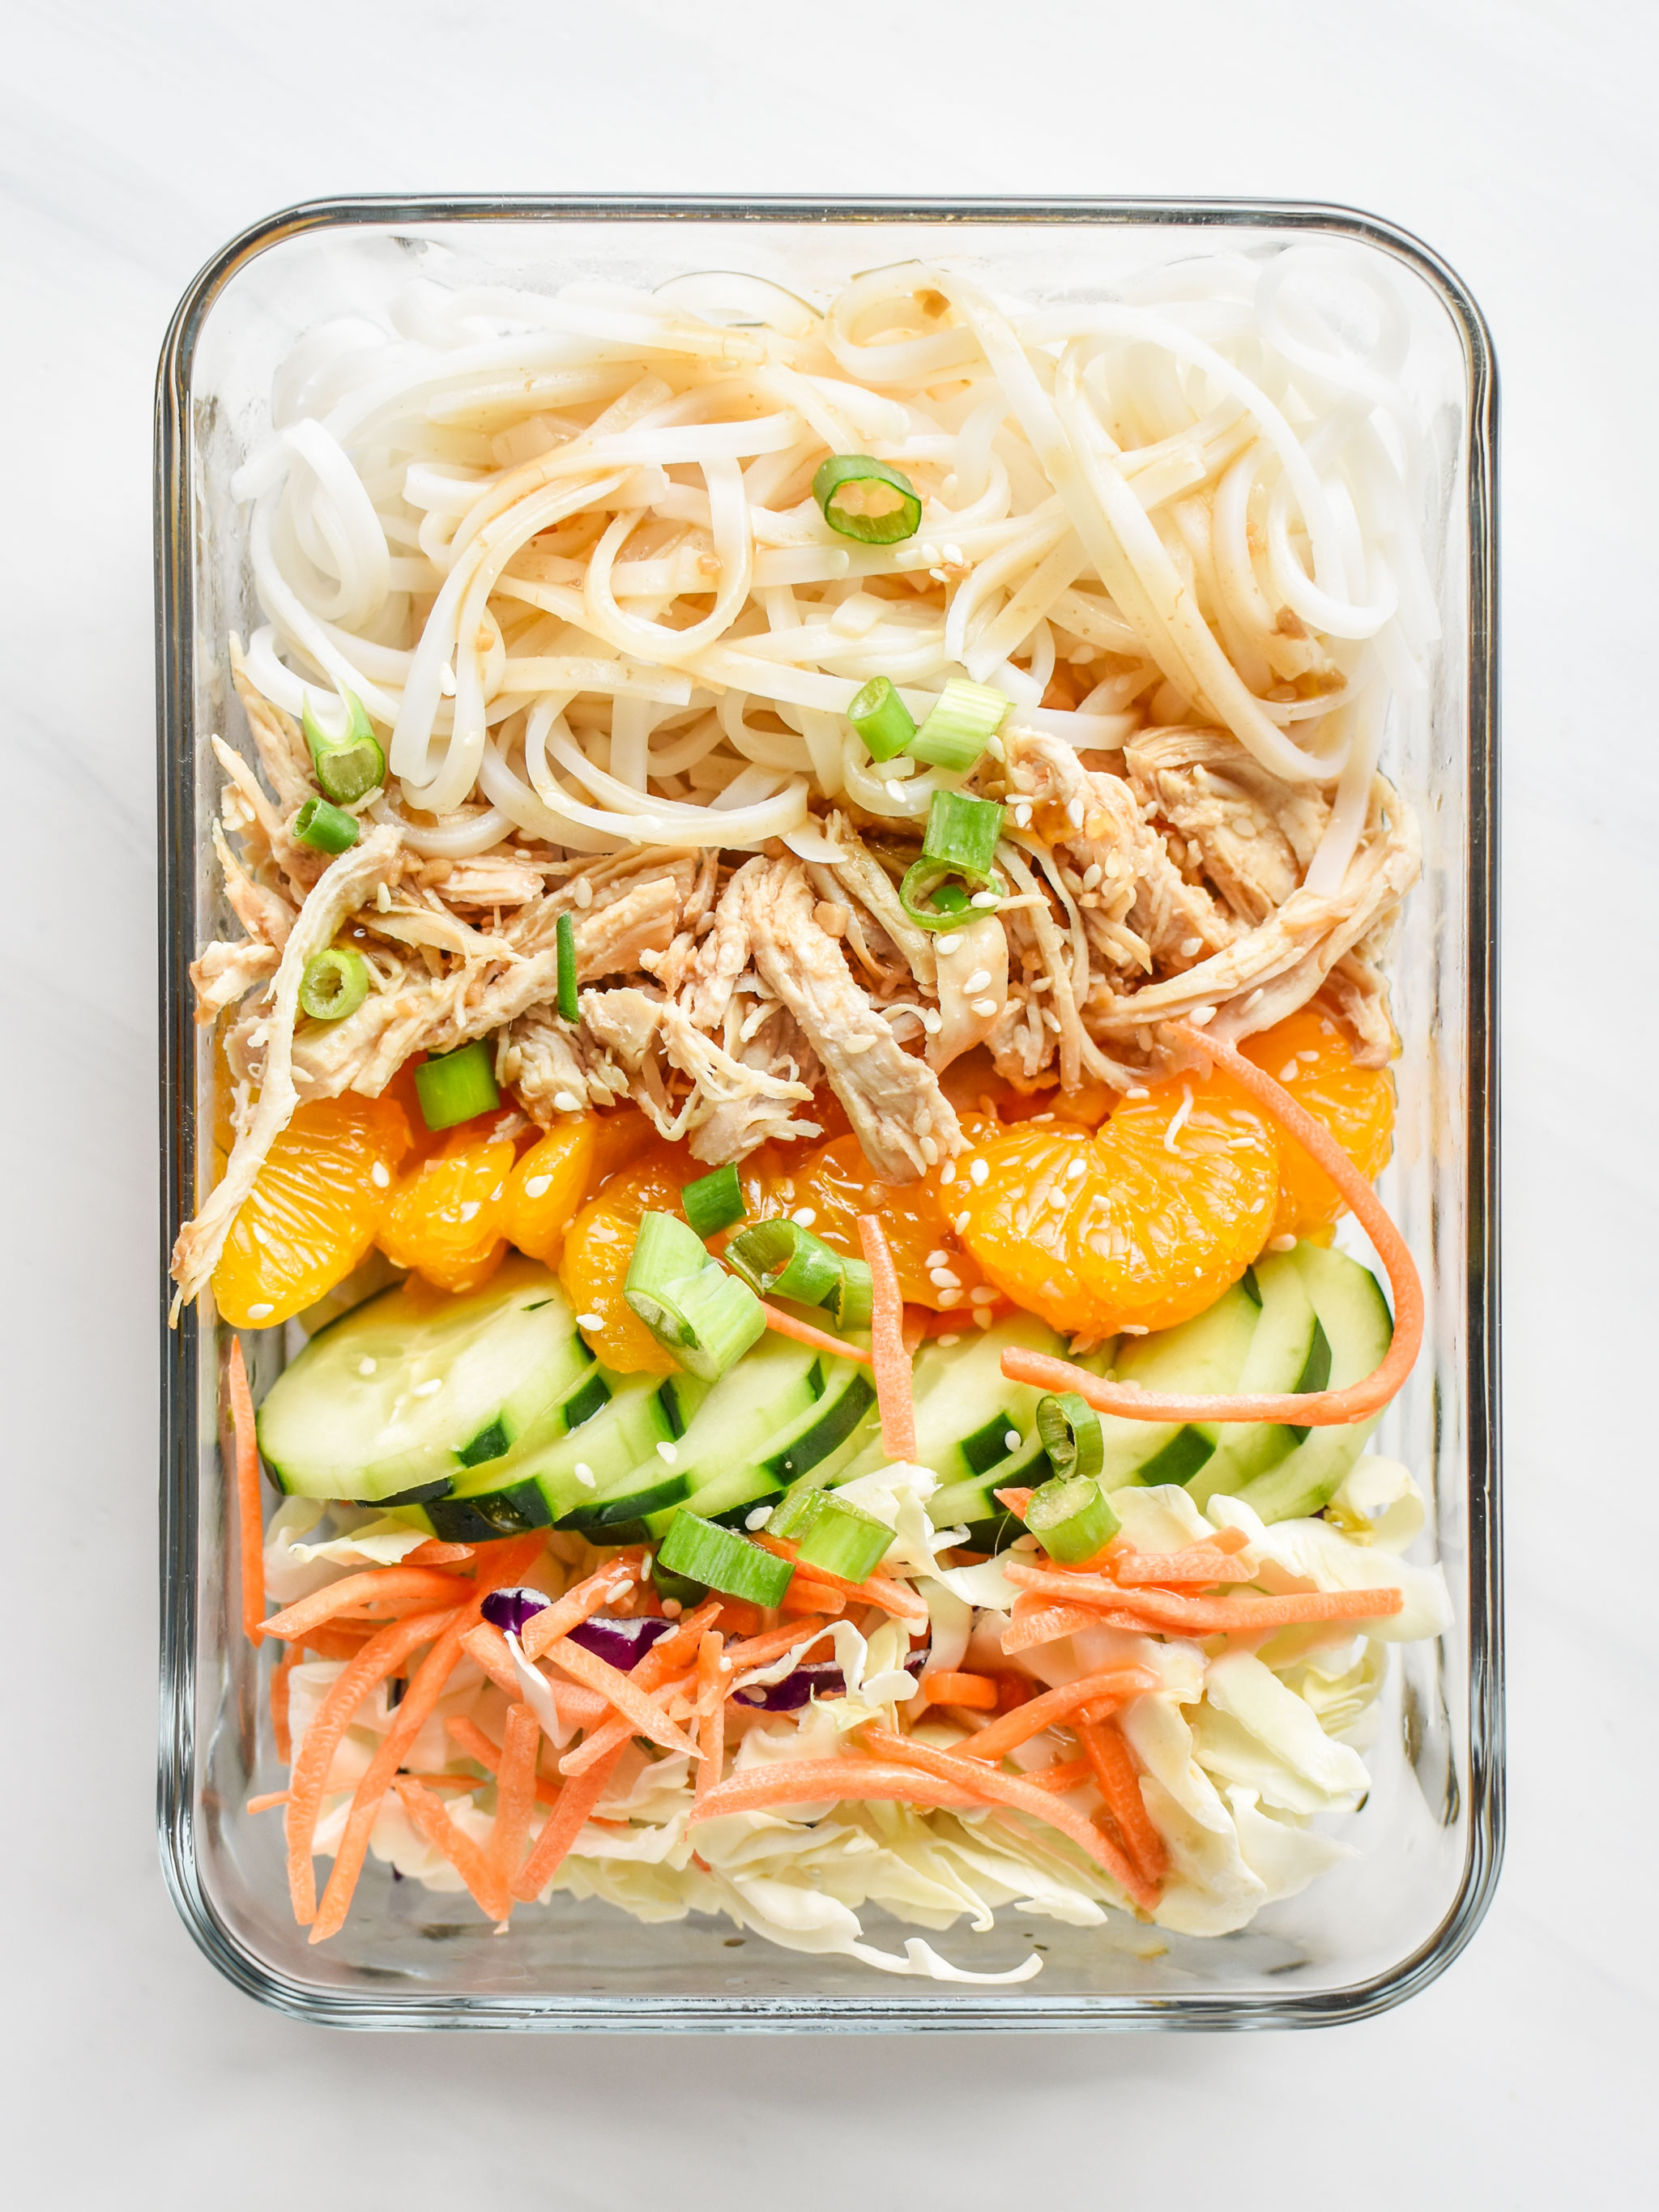 Sesame Chicken Cold Rice Noodle Salad Lunches - Project Meal Plan